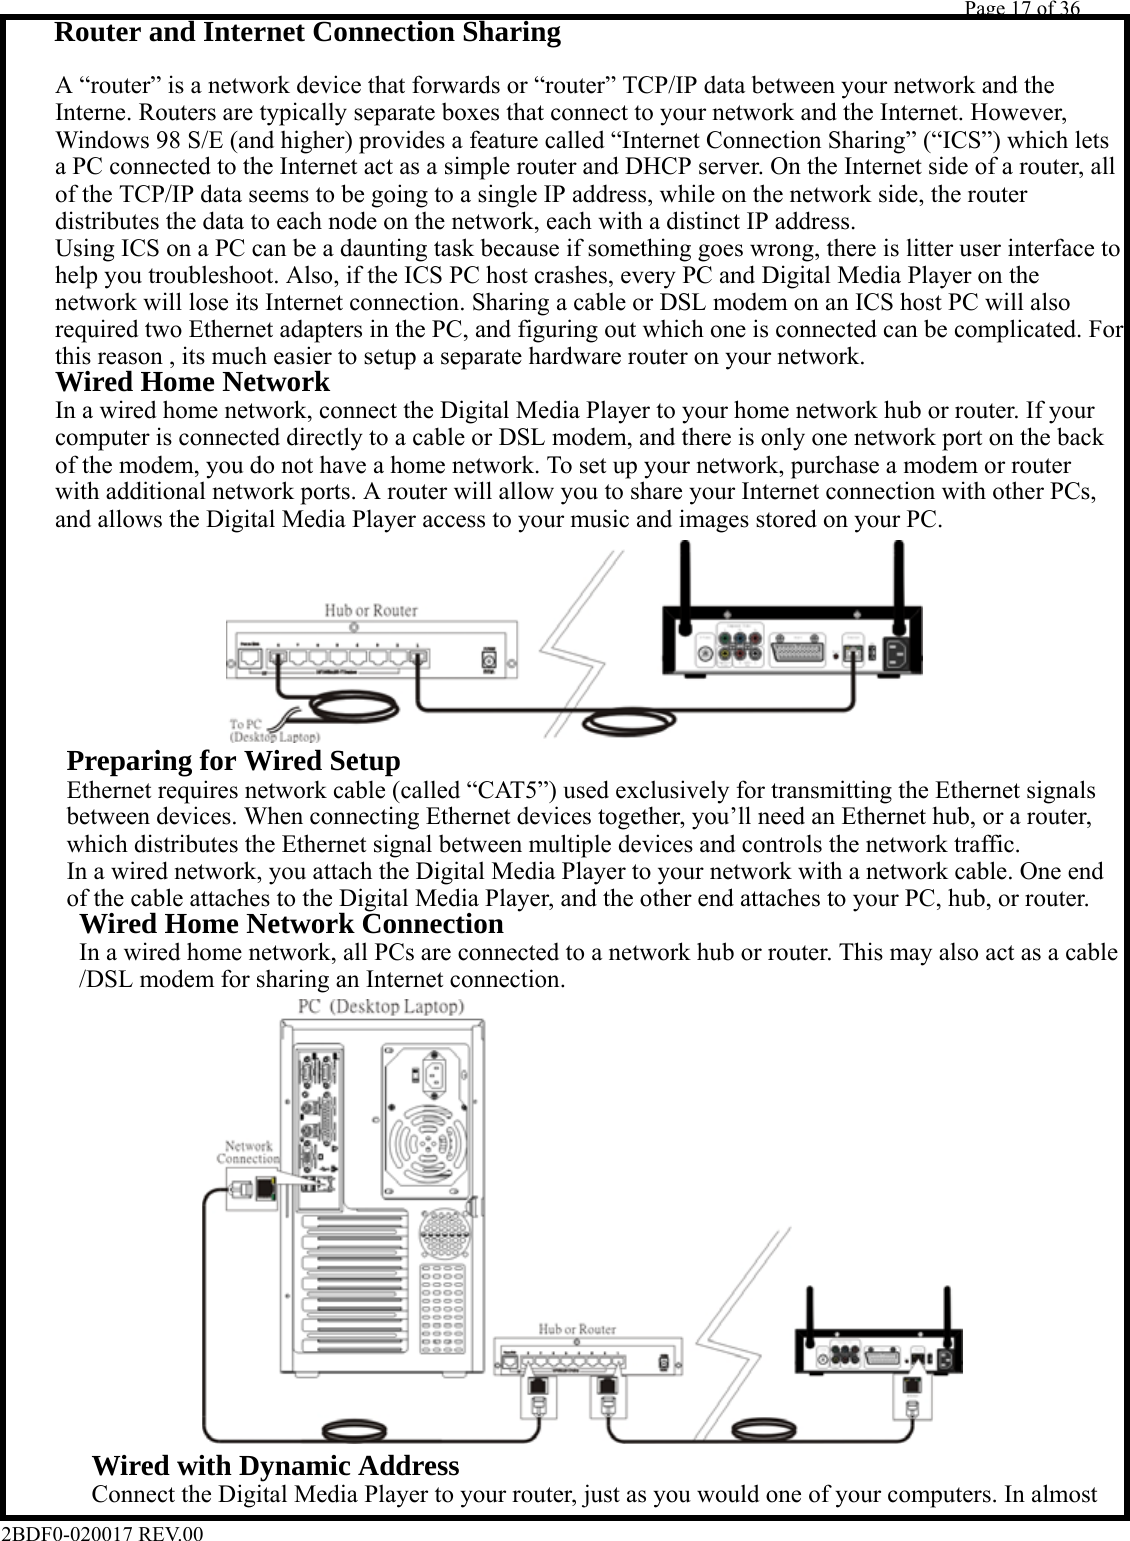         Page 17 of 36   2BDF0-020017 REV.00       Router and Internet Connection Sharing      A “router” is a network device that forwards or “router” TCP/IP data between your network and the      Interne. Routers are typically separate boxes that connect to your network and the Internet. However,      Windows 98 S/E (and higher) provides a feature called “Internet Connection Sharing” (“ICS”) which lets      a PC connected to the Internet act as a simple router and DHCP server. On the Internet side of a router, all      of the TCP/IP data seems to be going to a single IP address, while on the network side, the router      distributes the data to each node on the network, each with a distinct IP address.      Using ICS on a PC can be a daunting task because if something goes wrong, there is litter user interface to      help you troubleshoot. Also, if the ICS PC host crashes, every PC and Digital Media Player on the      network will lose its Internet connection. Sharing a cable or DSL modem on an ICS host PC will also      required two Ethernet adapters in the PC, and figuring out which one is connected can be complicated. For      this reason , its much easier to setup a separate hardware router on your network.     Wired Home Network      In a wired home network, connect the Digital Media Player to your home network hub or router. If your      computer is connected directly to a cable or DSL modem, and there is only one network port on the back      of the modem, you do not have a home network. To set up your network, purchase a modem or router      with additional network ports. A router will allow you to share your Internet connection with other PCs,      and allows the Digital Media Player access to your music and images stored on your PC.             Preparing for Wired Setup        Ethernet requires network cable (called “CAT5”) used exclusively for transmitting the Ethernet signals        between devices. When connecting Ethernet devices together, you’ll need an Ethernet hub, or a router,        which distributes the Ethernet signal between multiple devices and controls the network traffic.        In a wired network, you attach the Digital Media Player to your network with a network cable. One end        of the cable attaches to the Digital Media Player, and the other end attaches to your PC, hub, or router.      Wired Home Network Connection          In a wired home network, all PCs are connected to a network hub or router. This may also act as a cable          /DSL modem for sharing an Internet connection.                        Wired with Dynamic Address            Connect the Digital Media Player to your router, just as you would one of your computers. In almost 